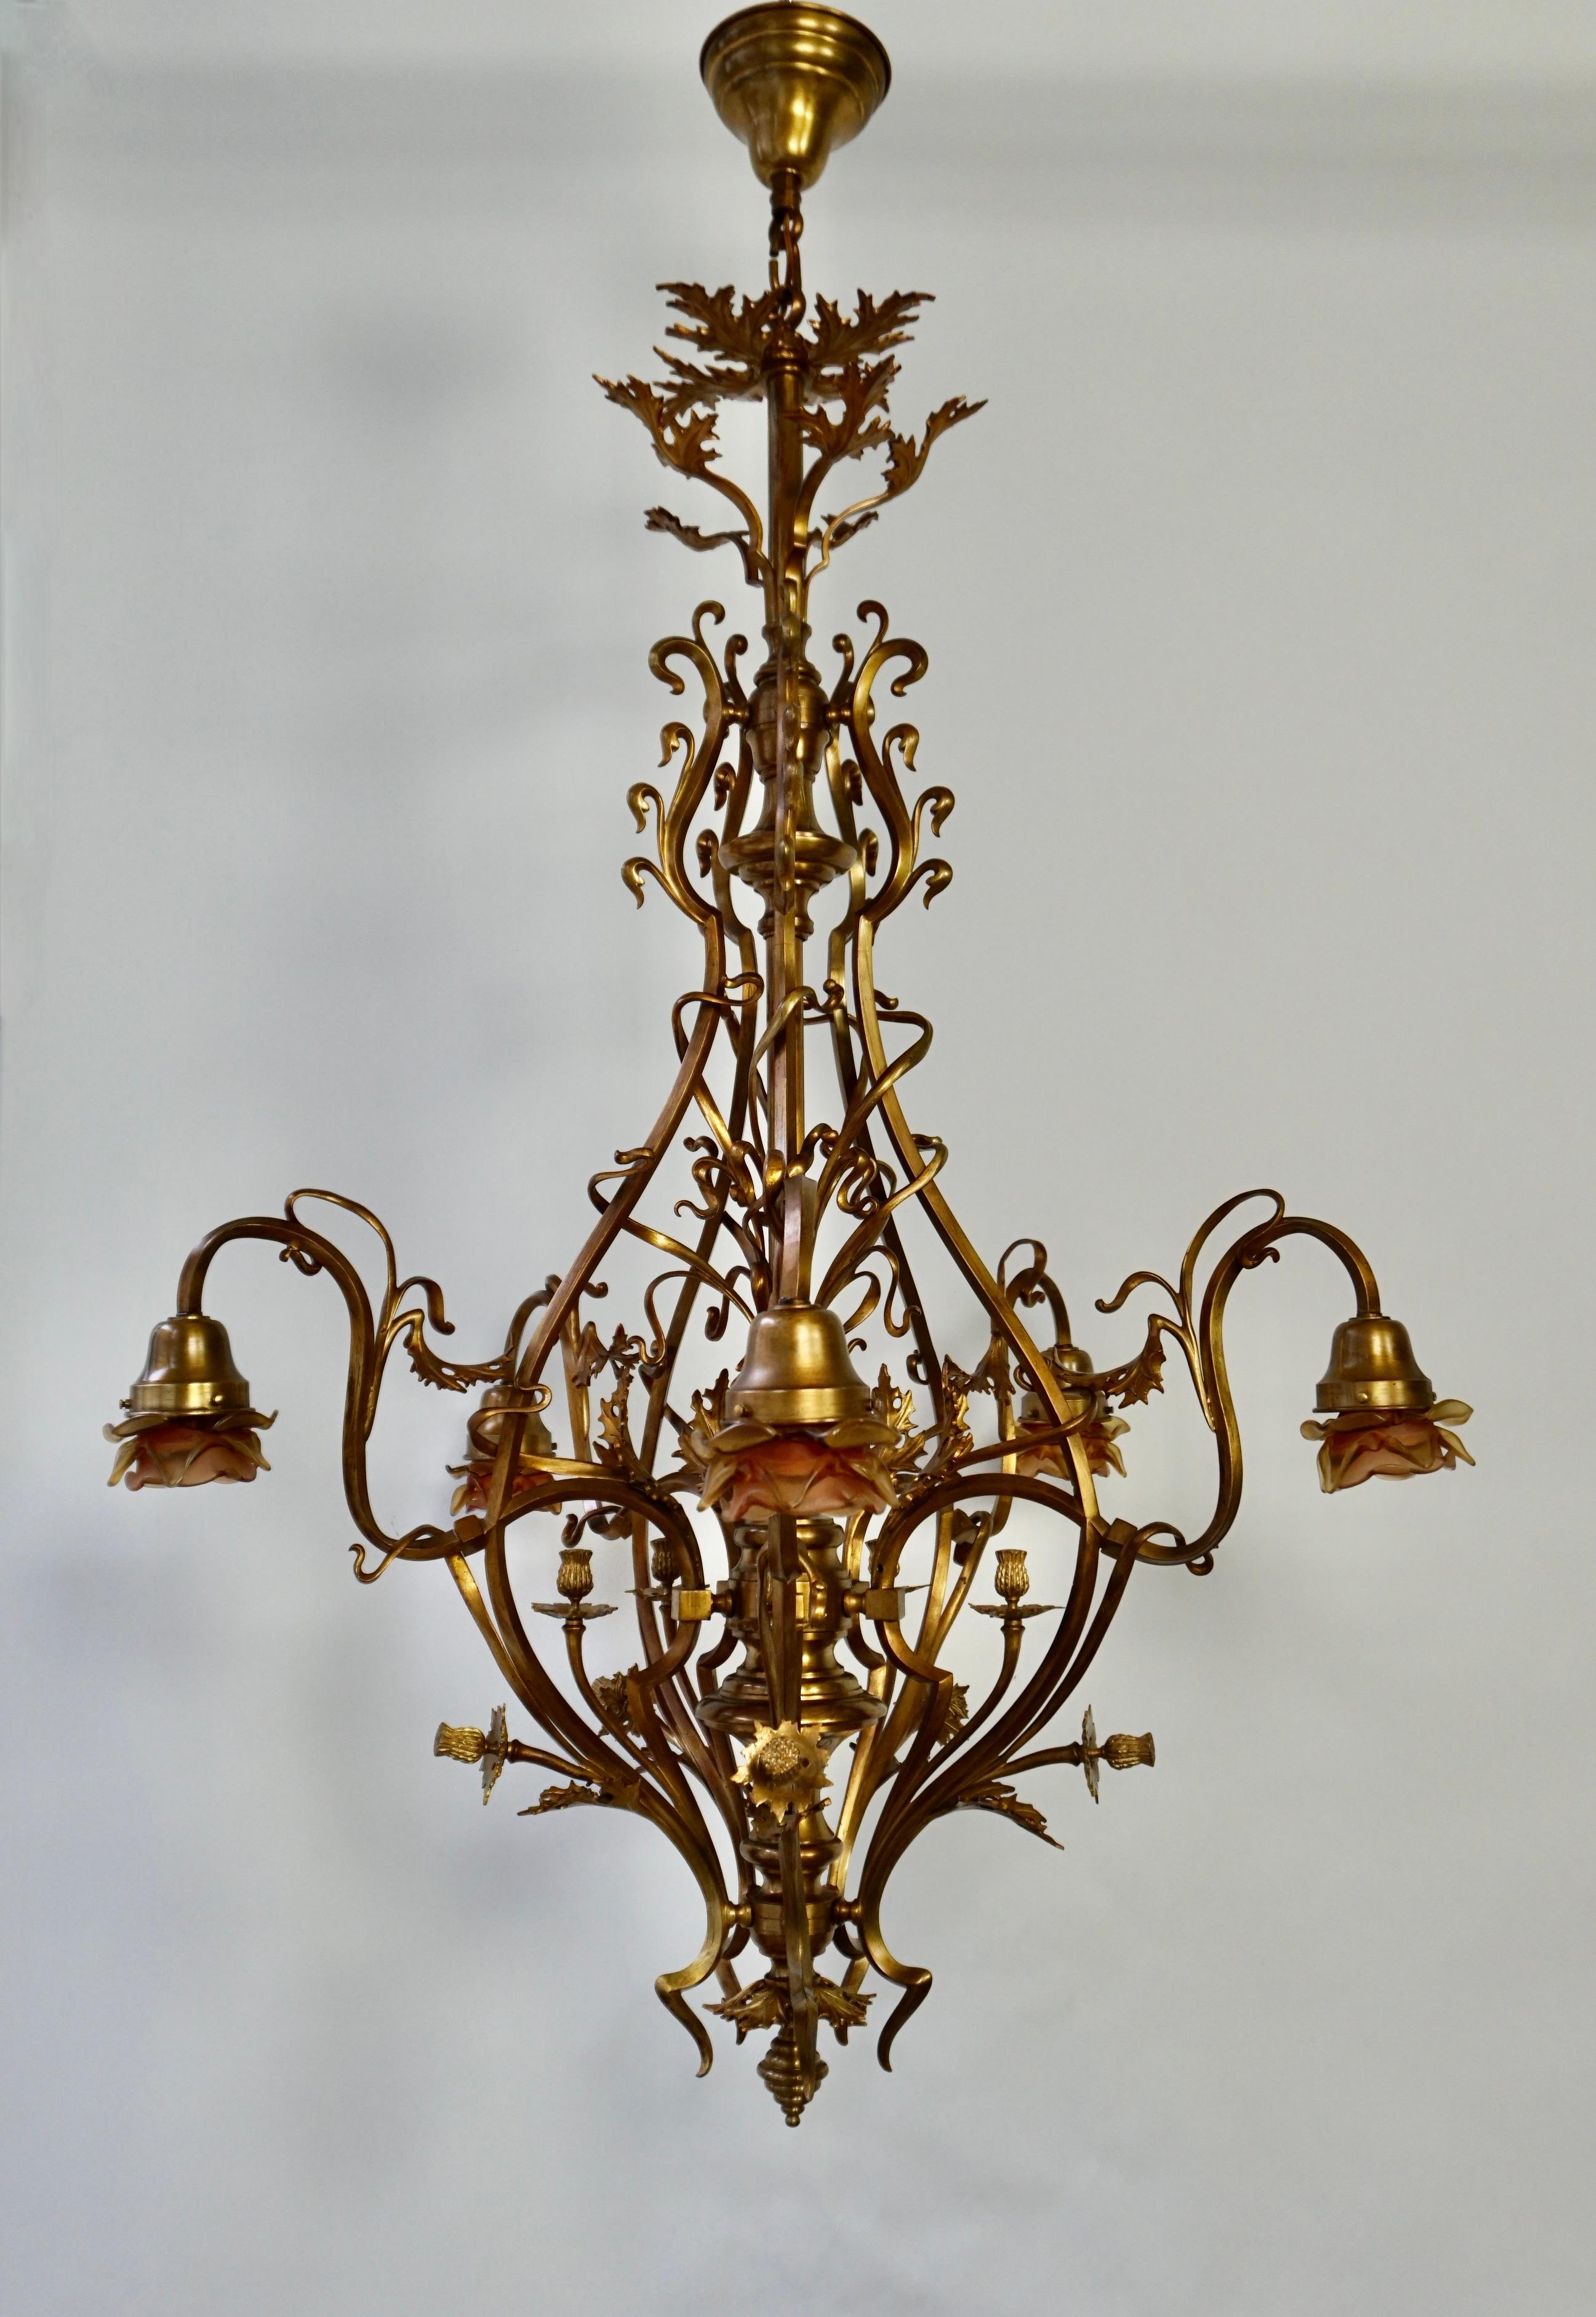 One of a kind antique light fixture from the early Art Nouveau era.    

This marvelously handcrafted bronze and brass fixture dates from the earliest days of European indoor lighting. The flowing and truly elegant design and the quality of the